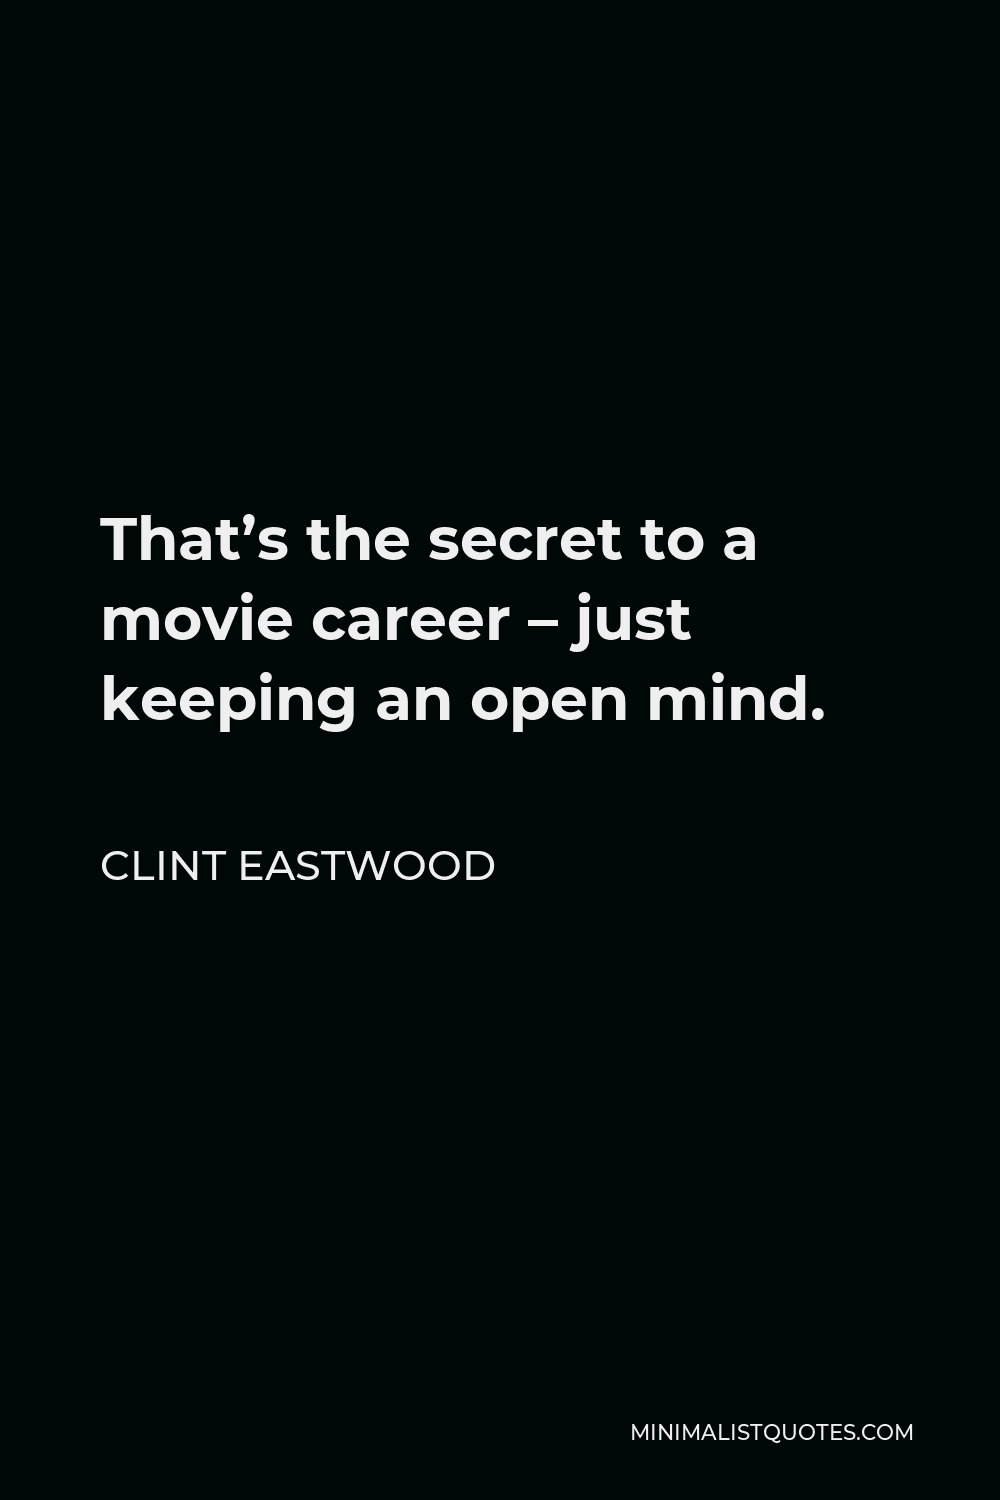 Clint Eastwood Quote: Ever notice how you come across somebody once in ...